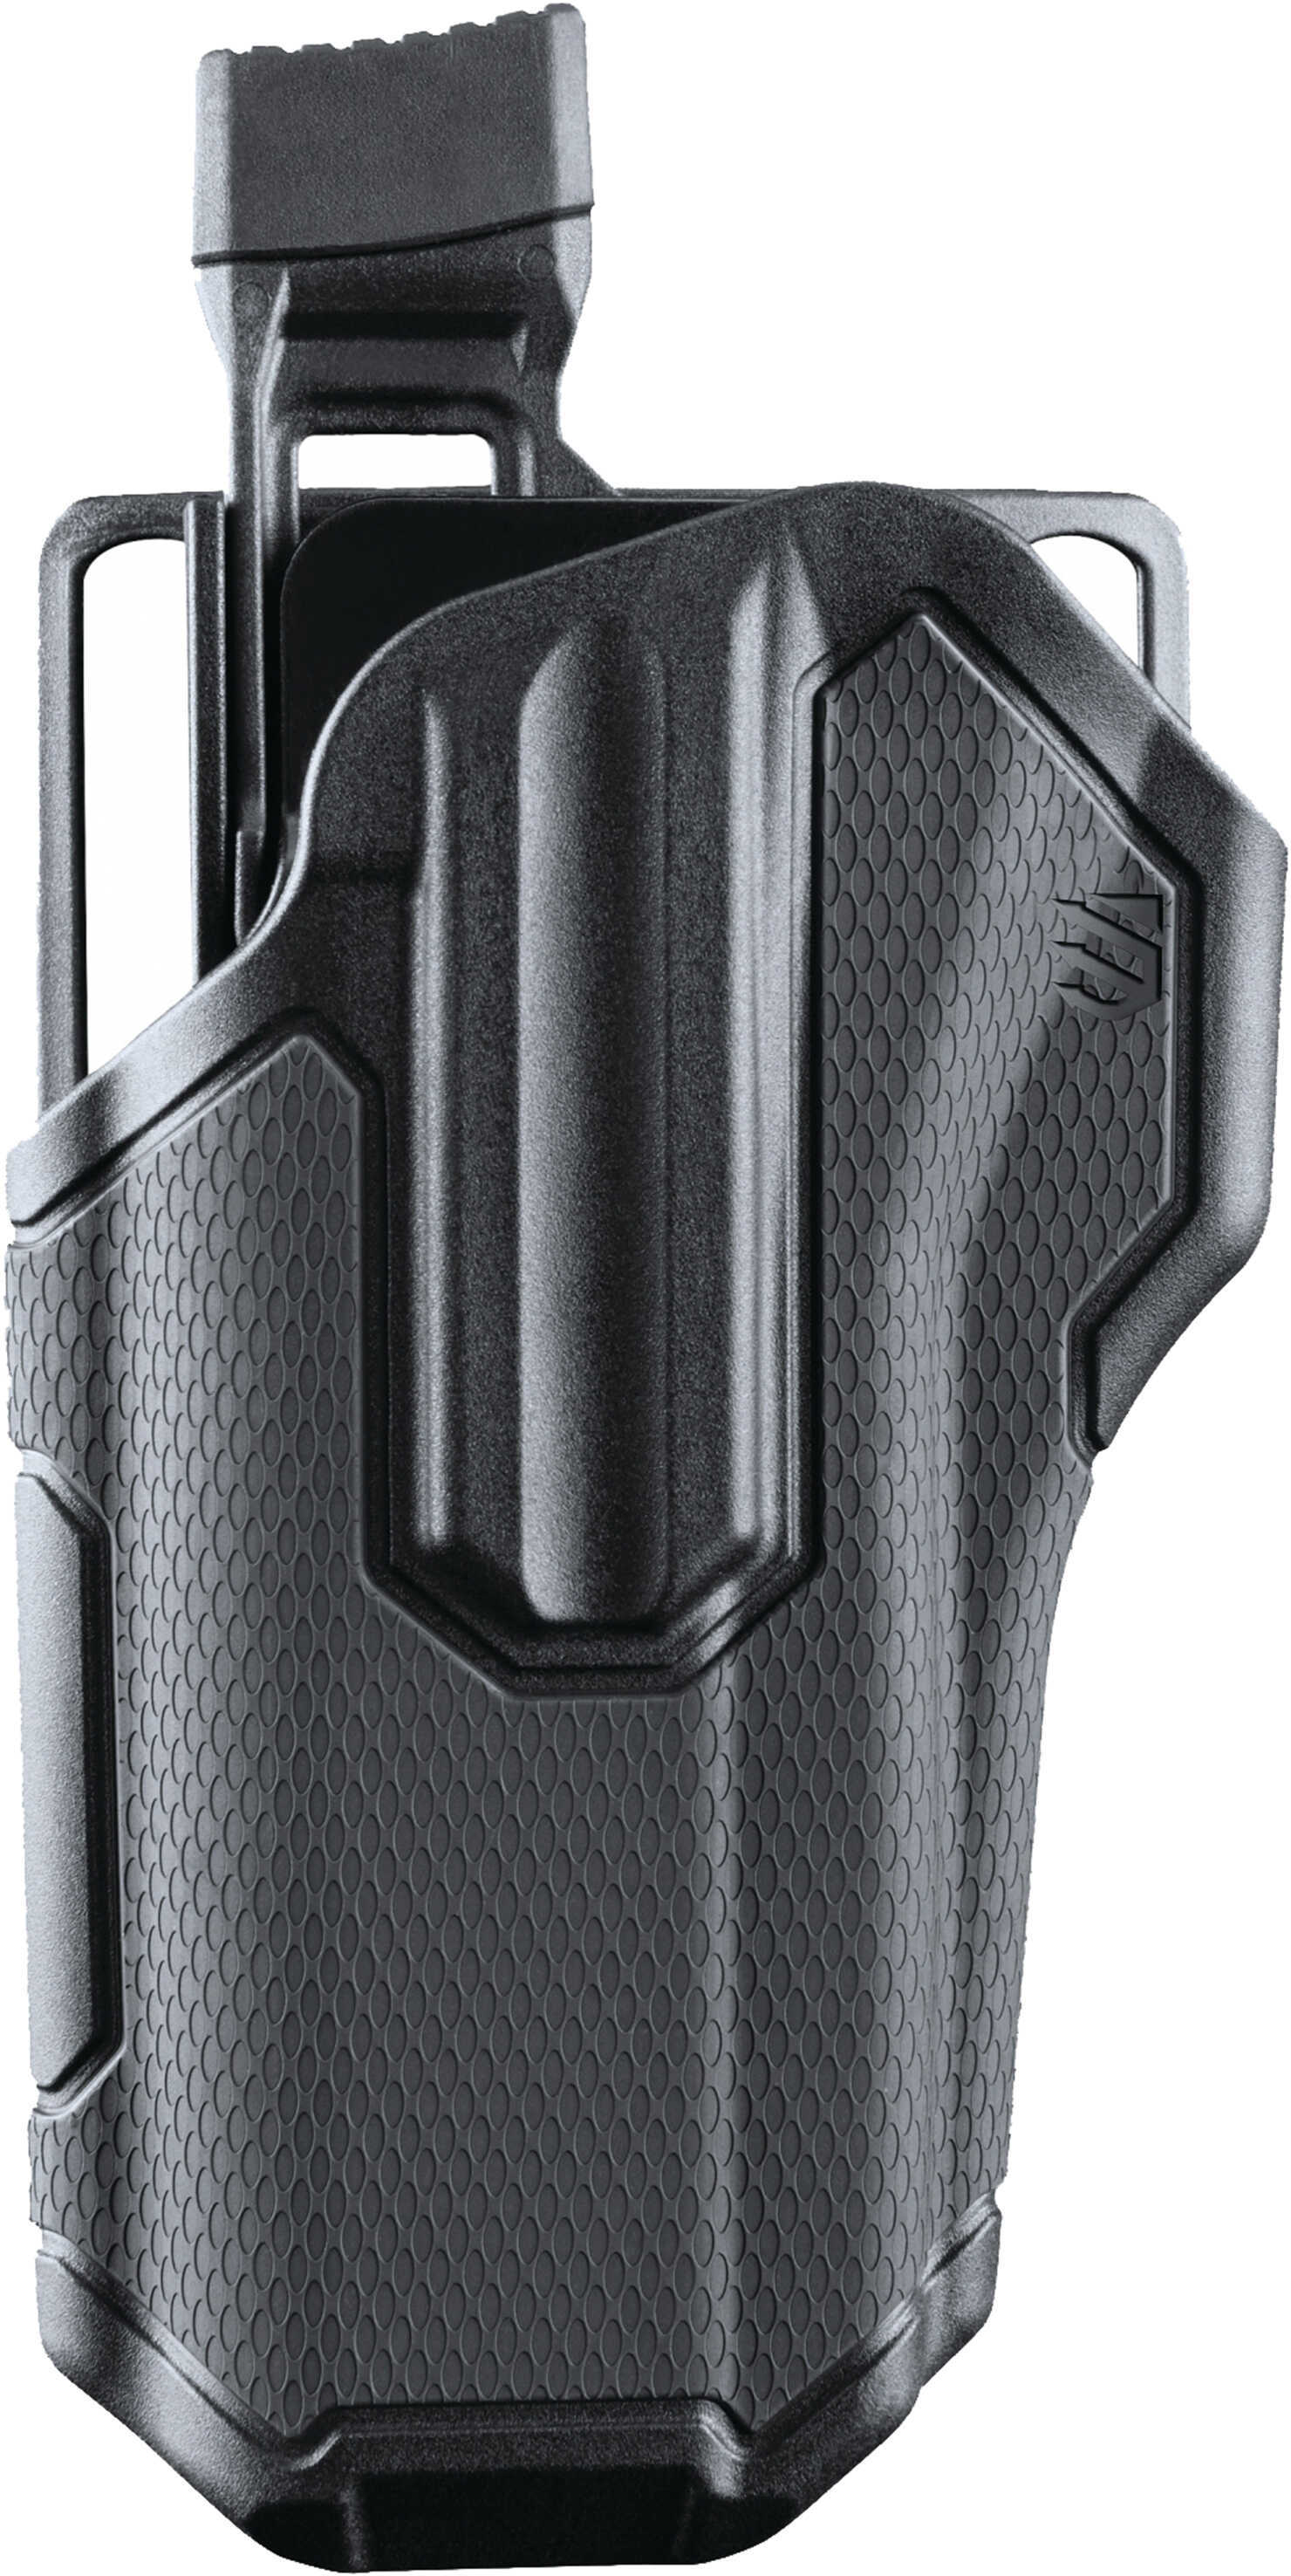 BLACKHAWK! Omnivore L2 Multi-Fit Holster Fits More Than 150 Styles of Semi-Automatic Handguns with Accessory Rail Thumb